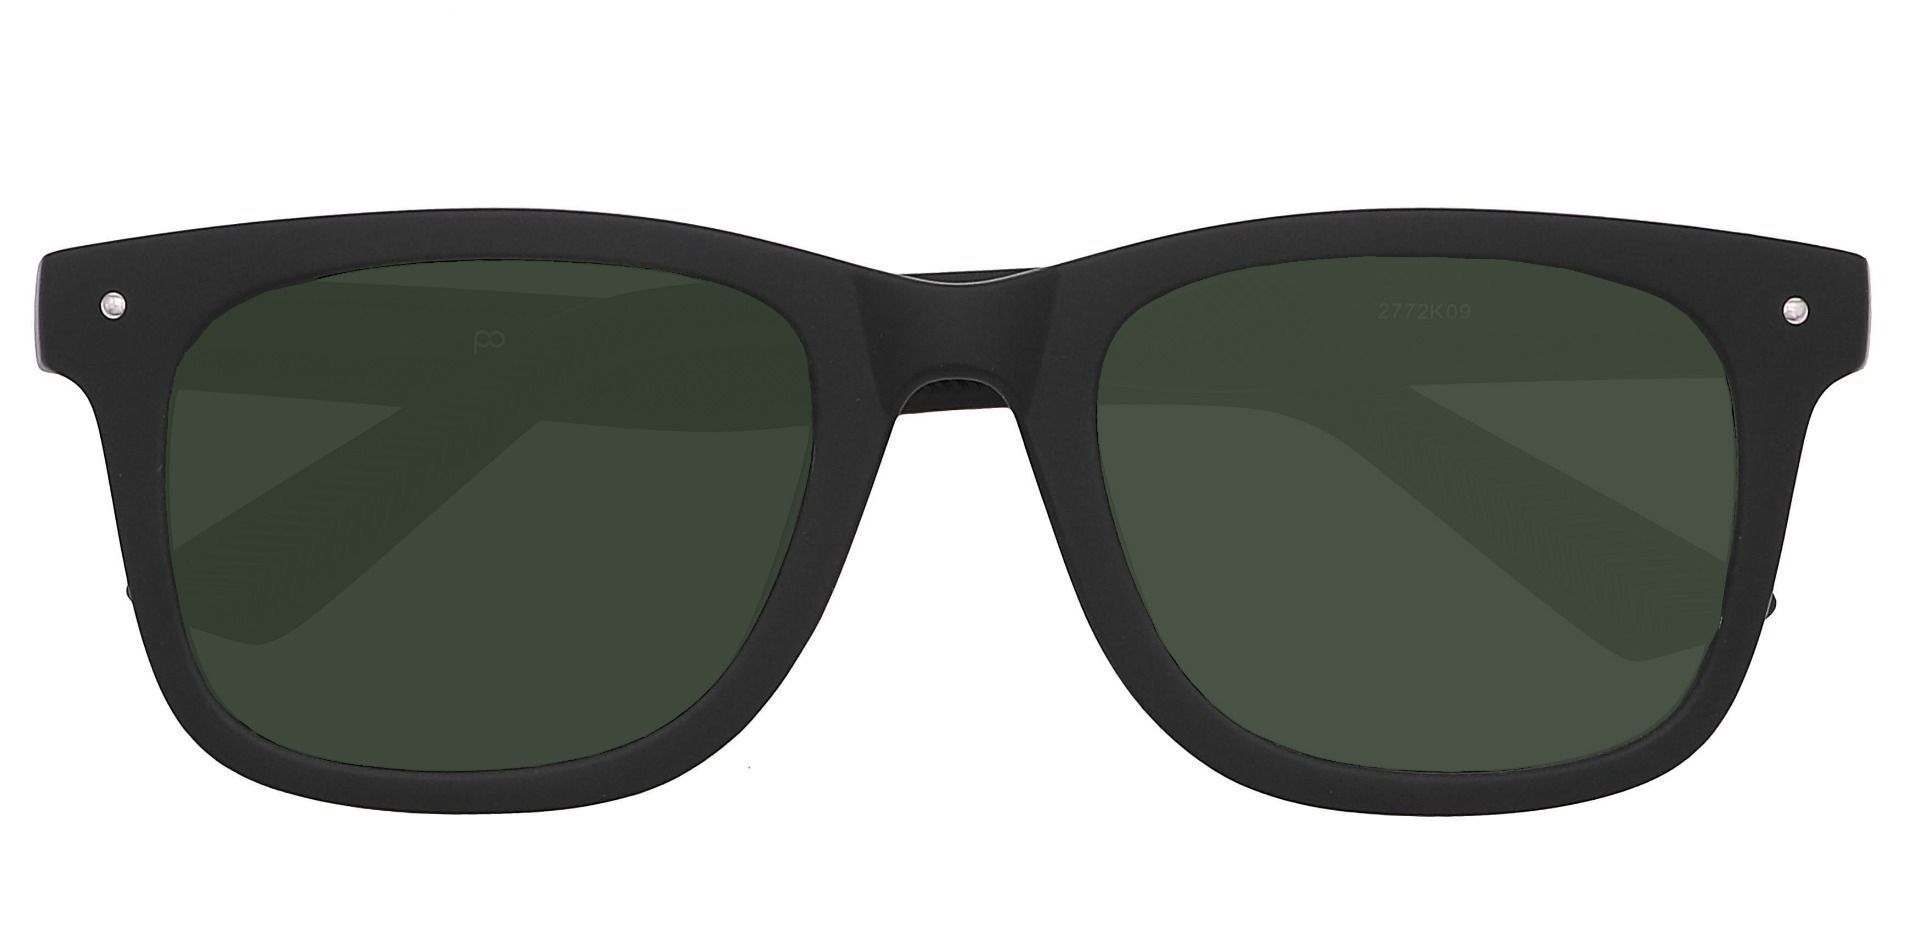 McKinley Square Non-Rx Sunglasses - Black Frame With Green Lenses